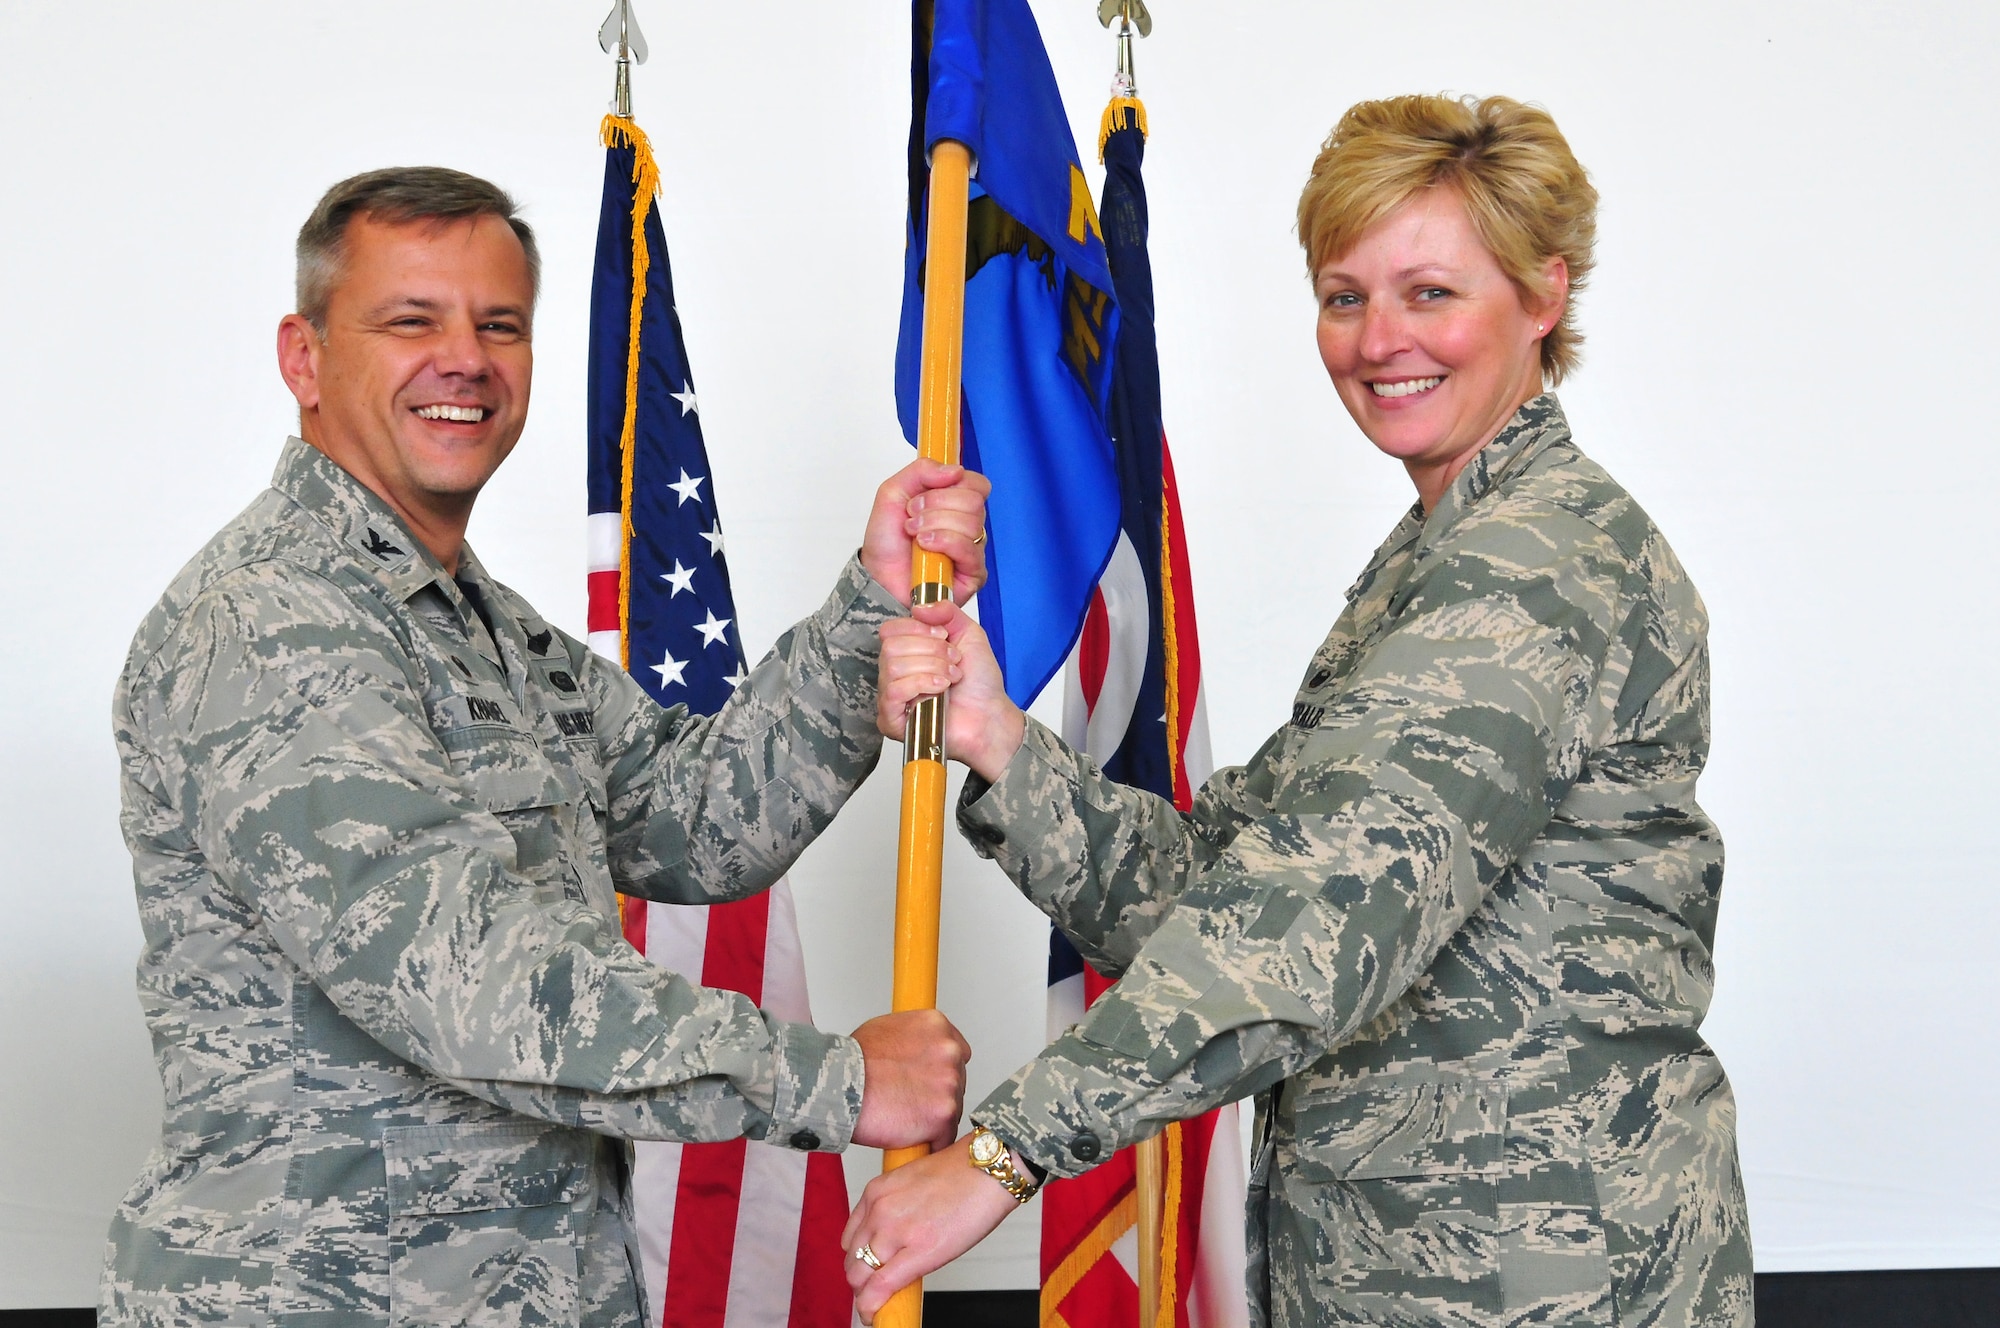 Lt. Col. Kimberly Fitzgerald, the incoming 178th Mission Support Group commander, assumes her new leadership role during an assumption of command ceremony at Springfield Air National Guard Base in Springfield, Ohio, Oct. 16, 2016. Fitzgerald has served in the Air National Guard for over 20 years. (U.S. Air National Guard photo by Airman 1st Class Rachel Simones)